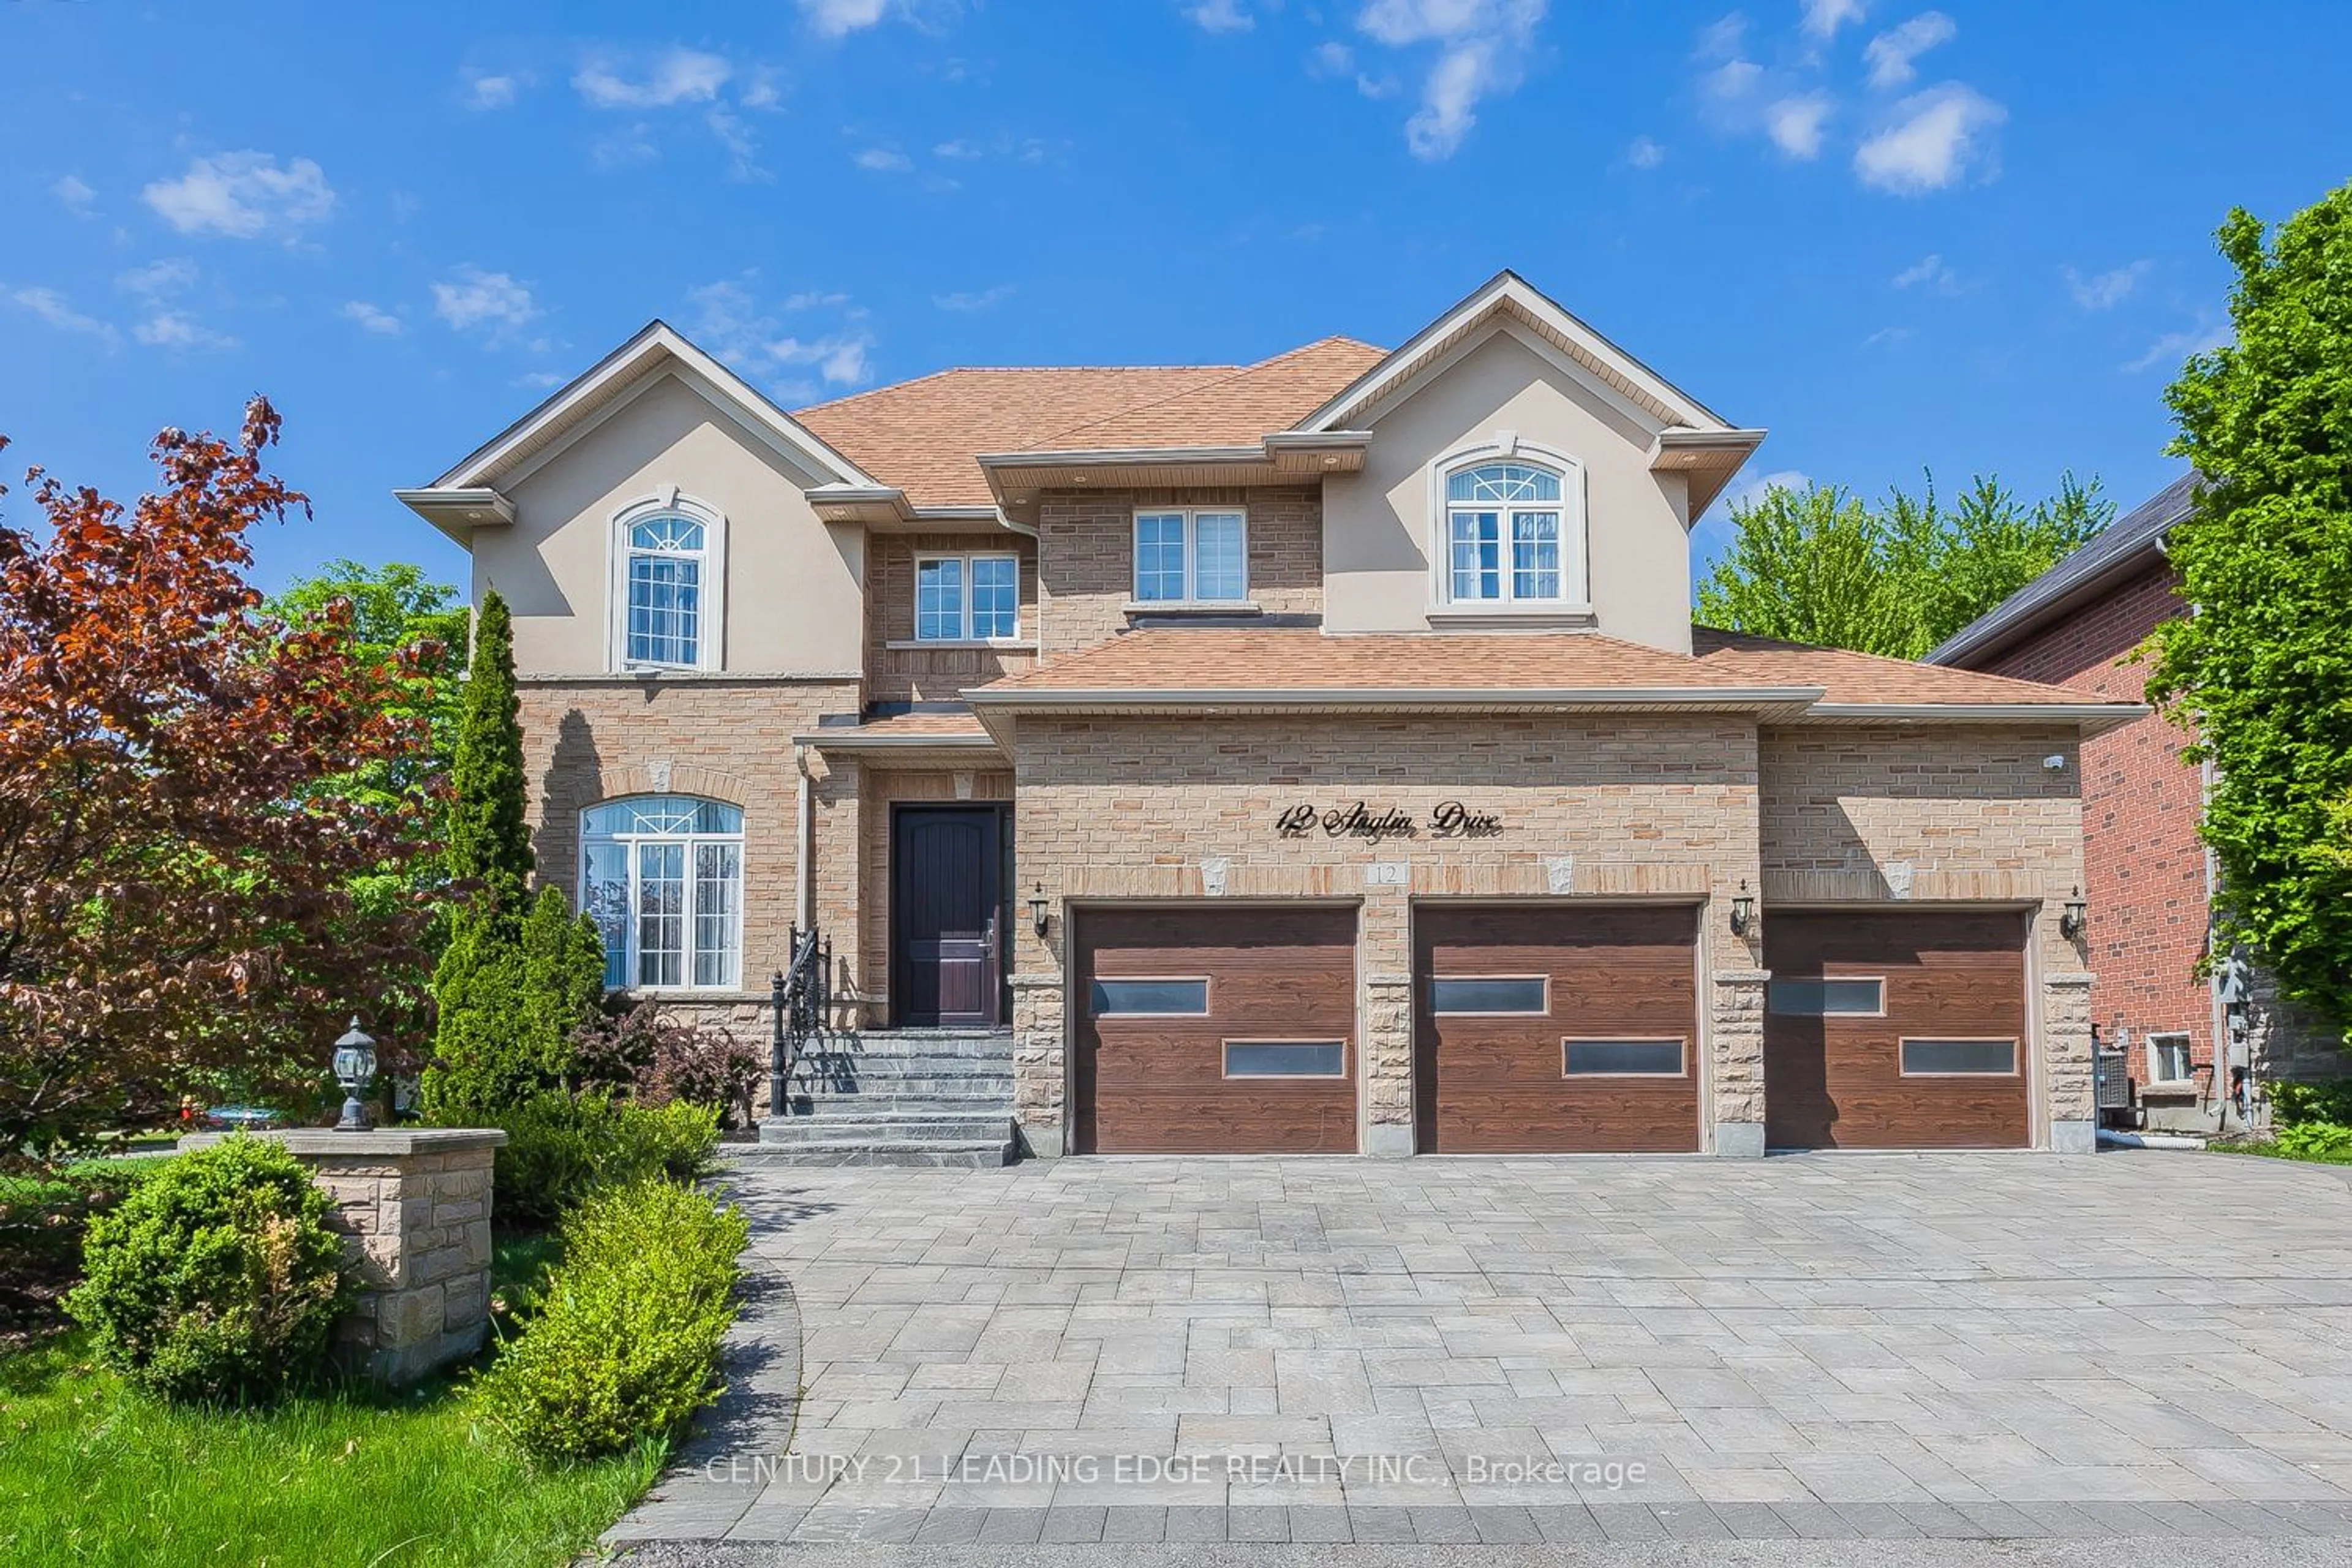 Home with brick exterior material for 12 Anglin Dr, Richmond Hill Ontario L4E 3M5